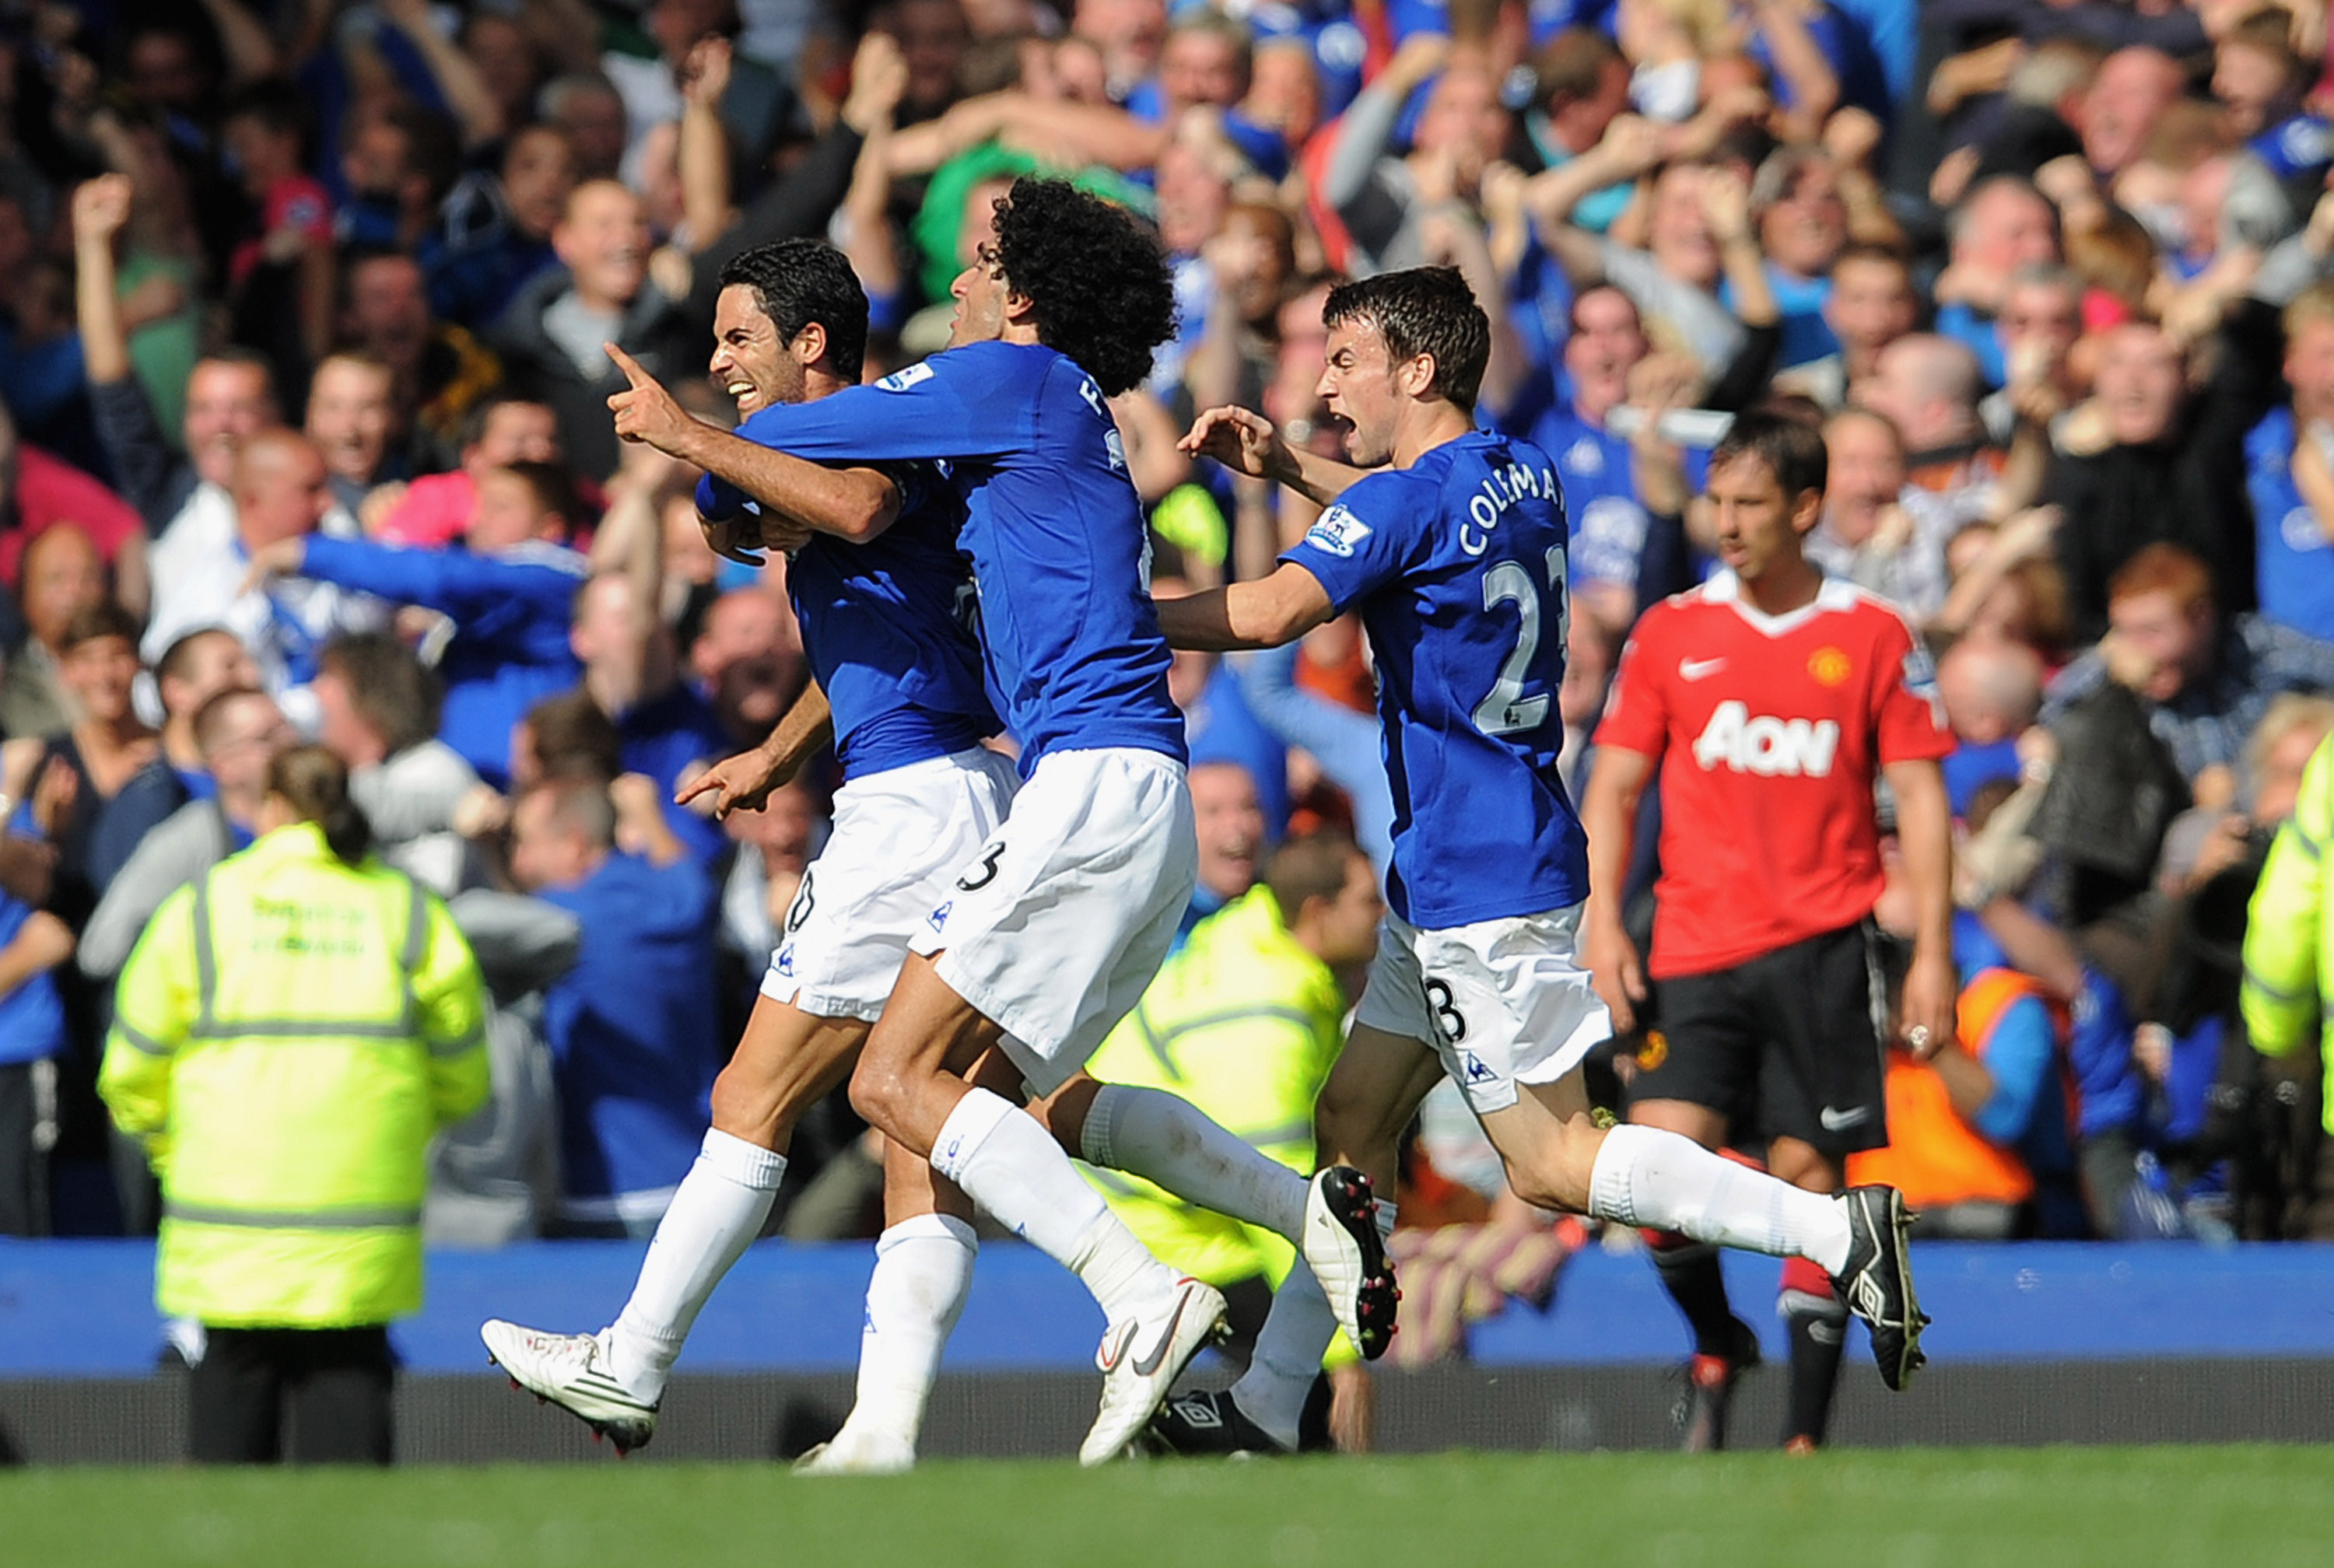 LIVERPOOL, ENGLAND - SEPTEMBER 11:  Mikel Arteta of Everton celebrates scoring to make it 3-3 with team mates during the Barclays Premier League match between Everton and Manchester United at Goodison Park on September 11, 2010 in Liverpool, England.  (Ph